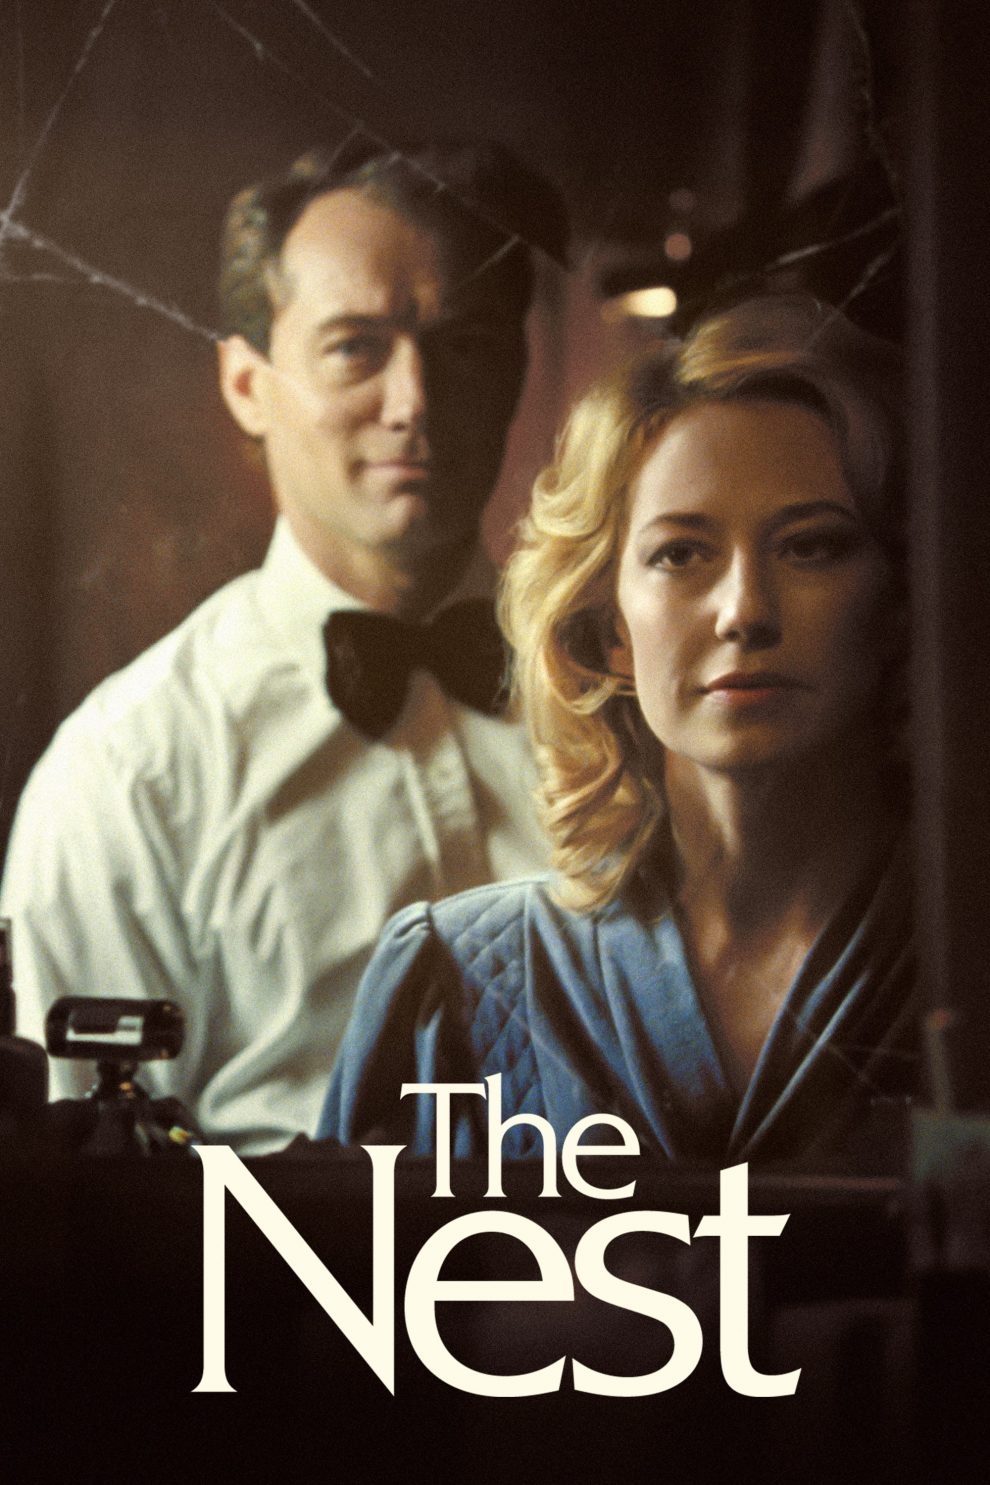 Poster for the movie "The Nest"